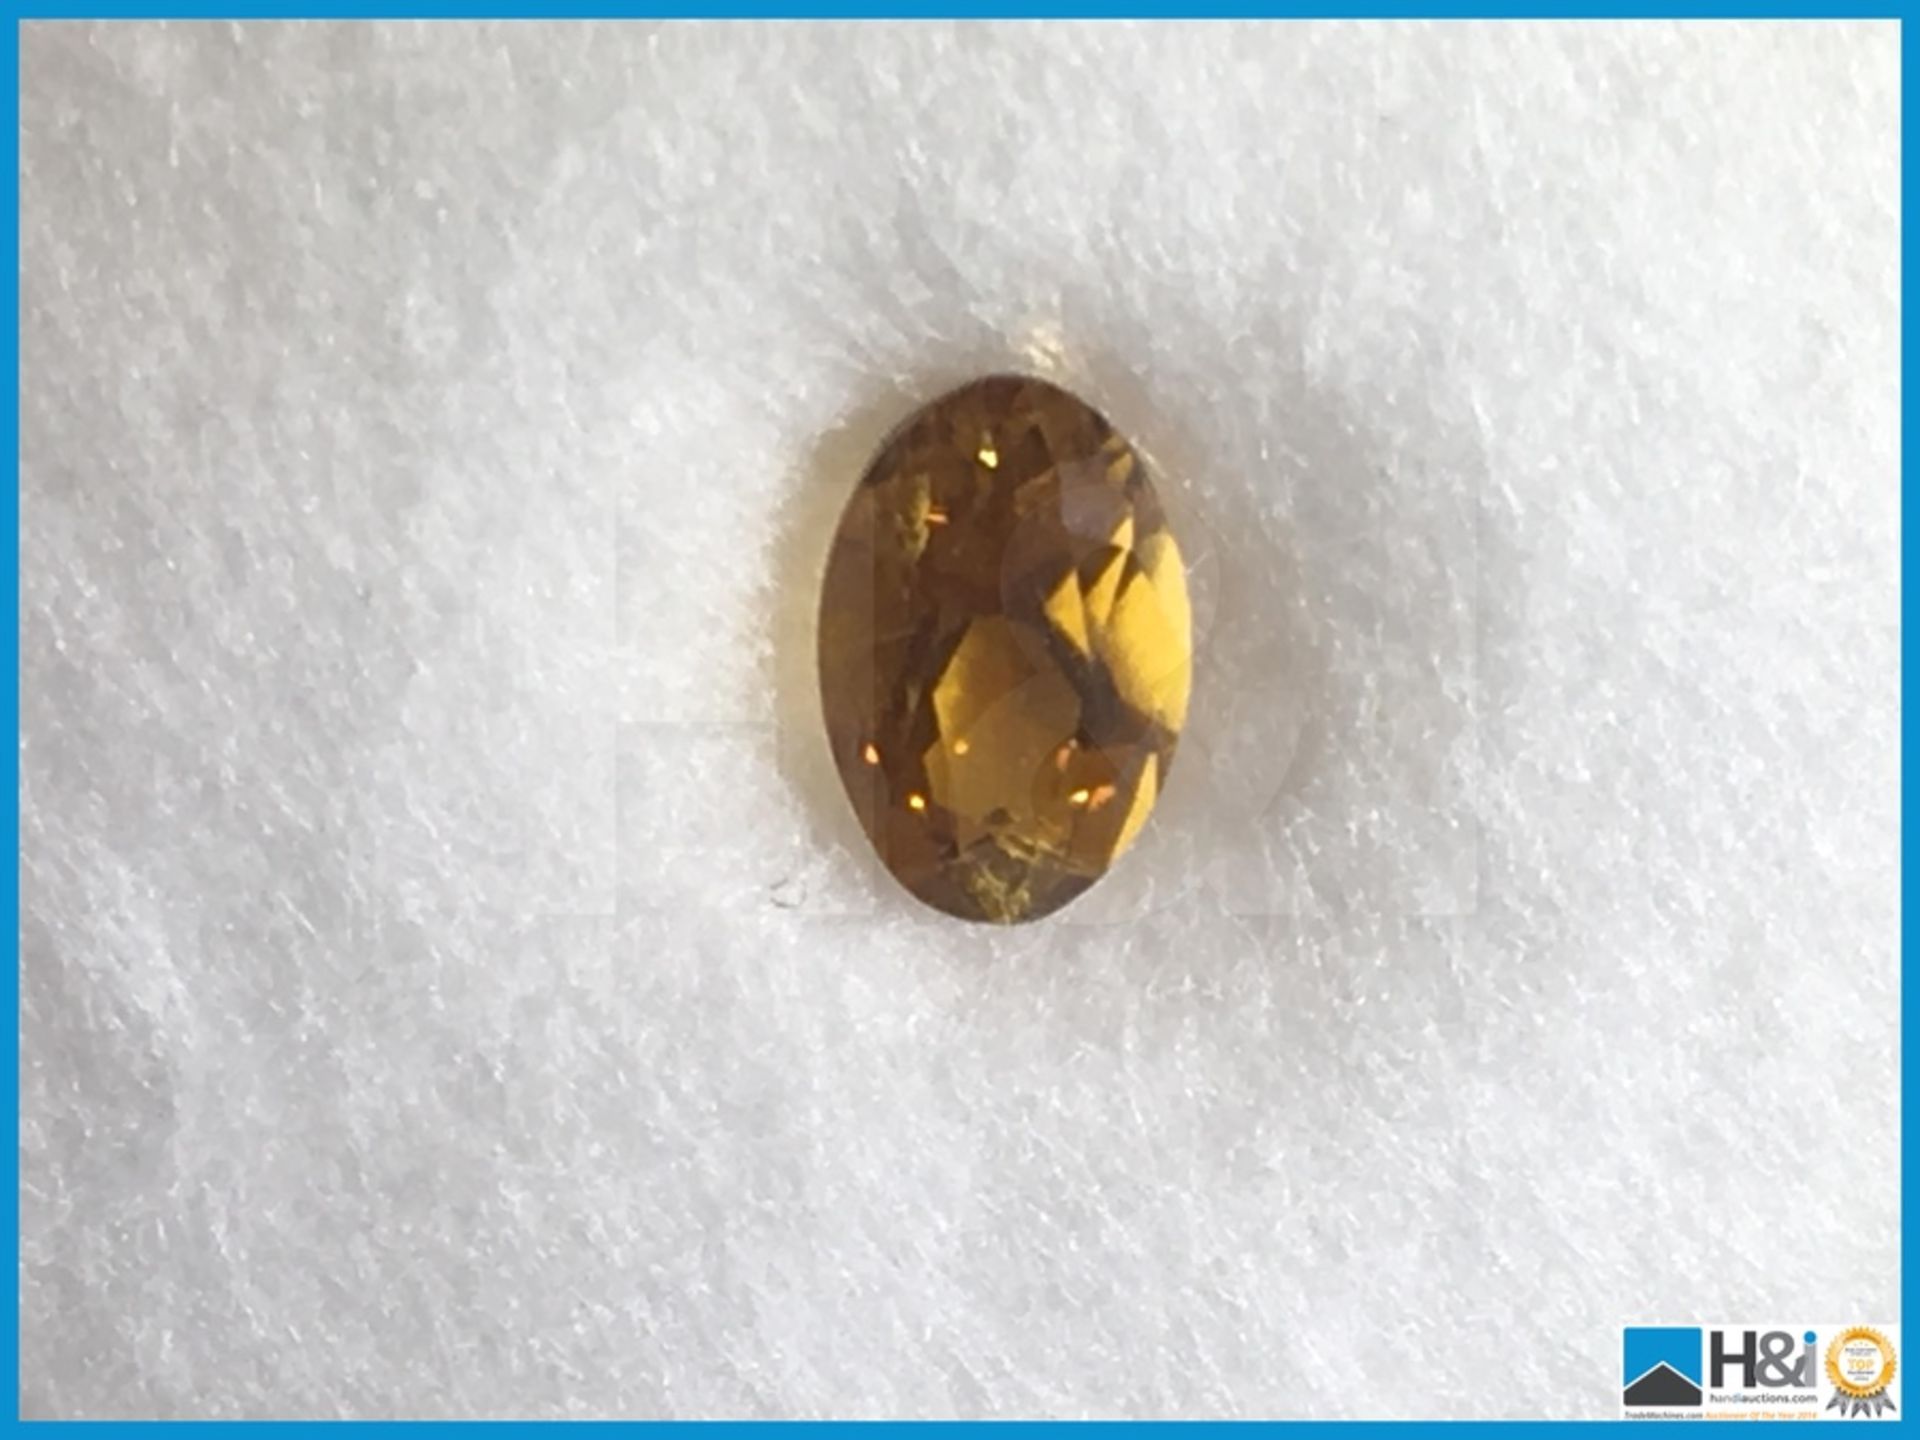 0.48ct Natural Yellow Tourmaline. Oval Facetted Cut. Transparent 5.98x3.98x3.18mm. Certification: